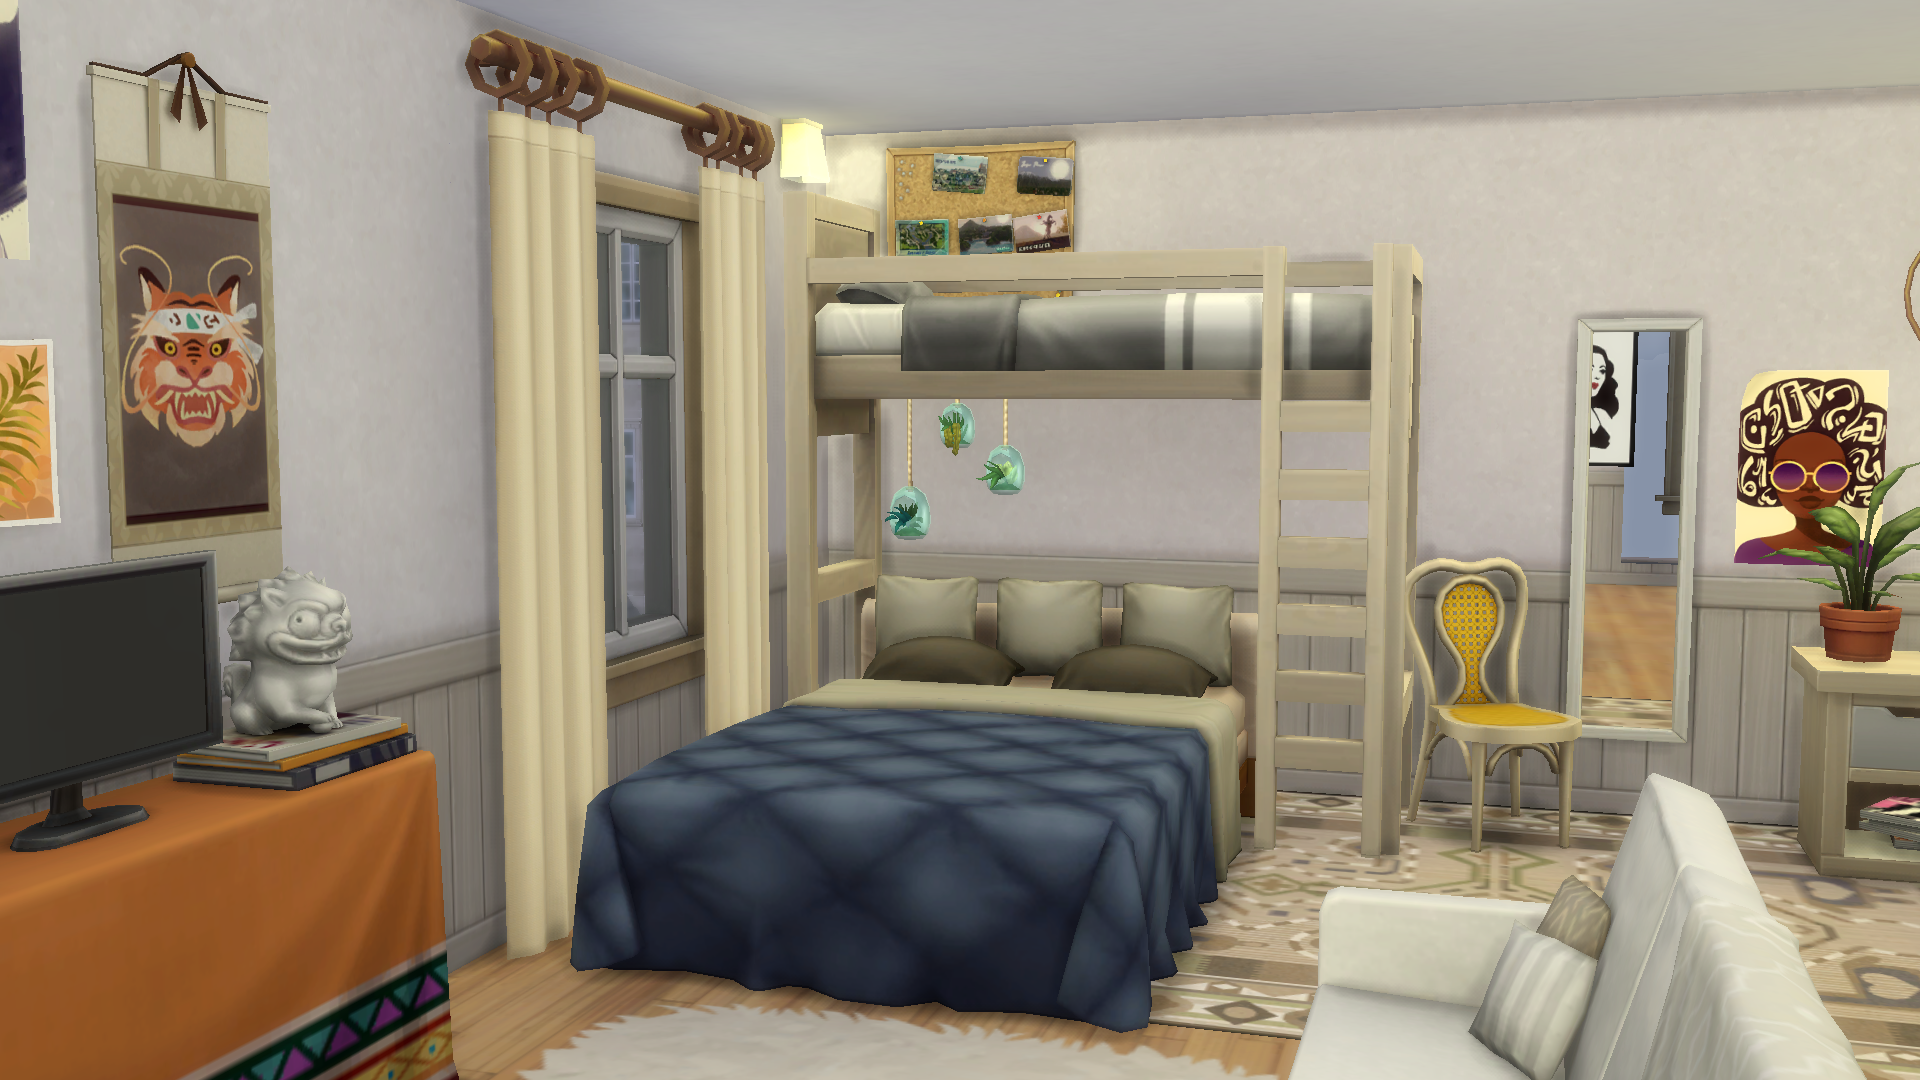 Building With Bunk Beds In The Sims 4, How To Make Bunk Beds Sims 4